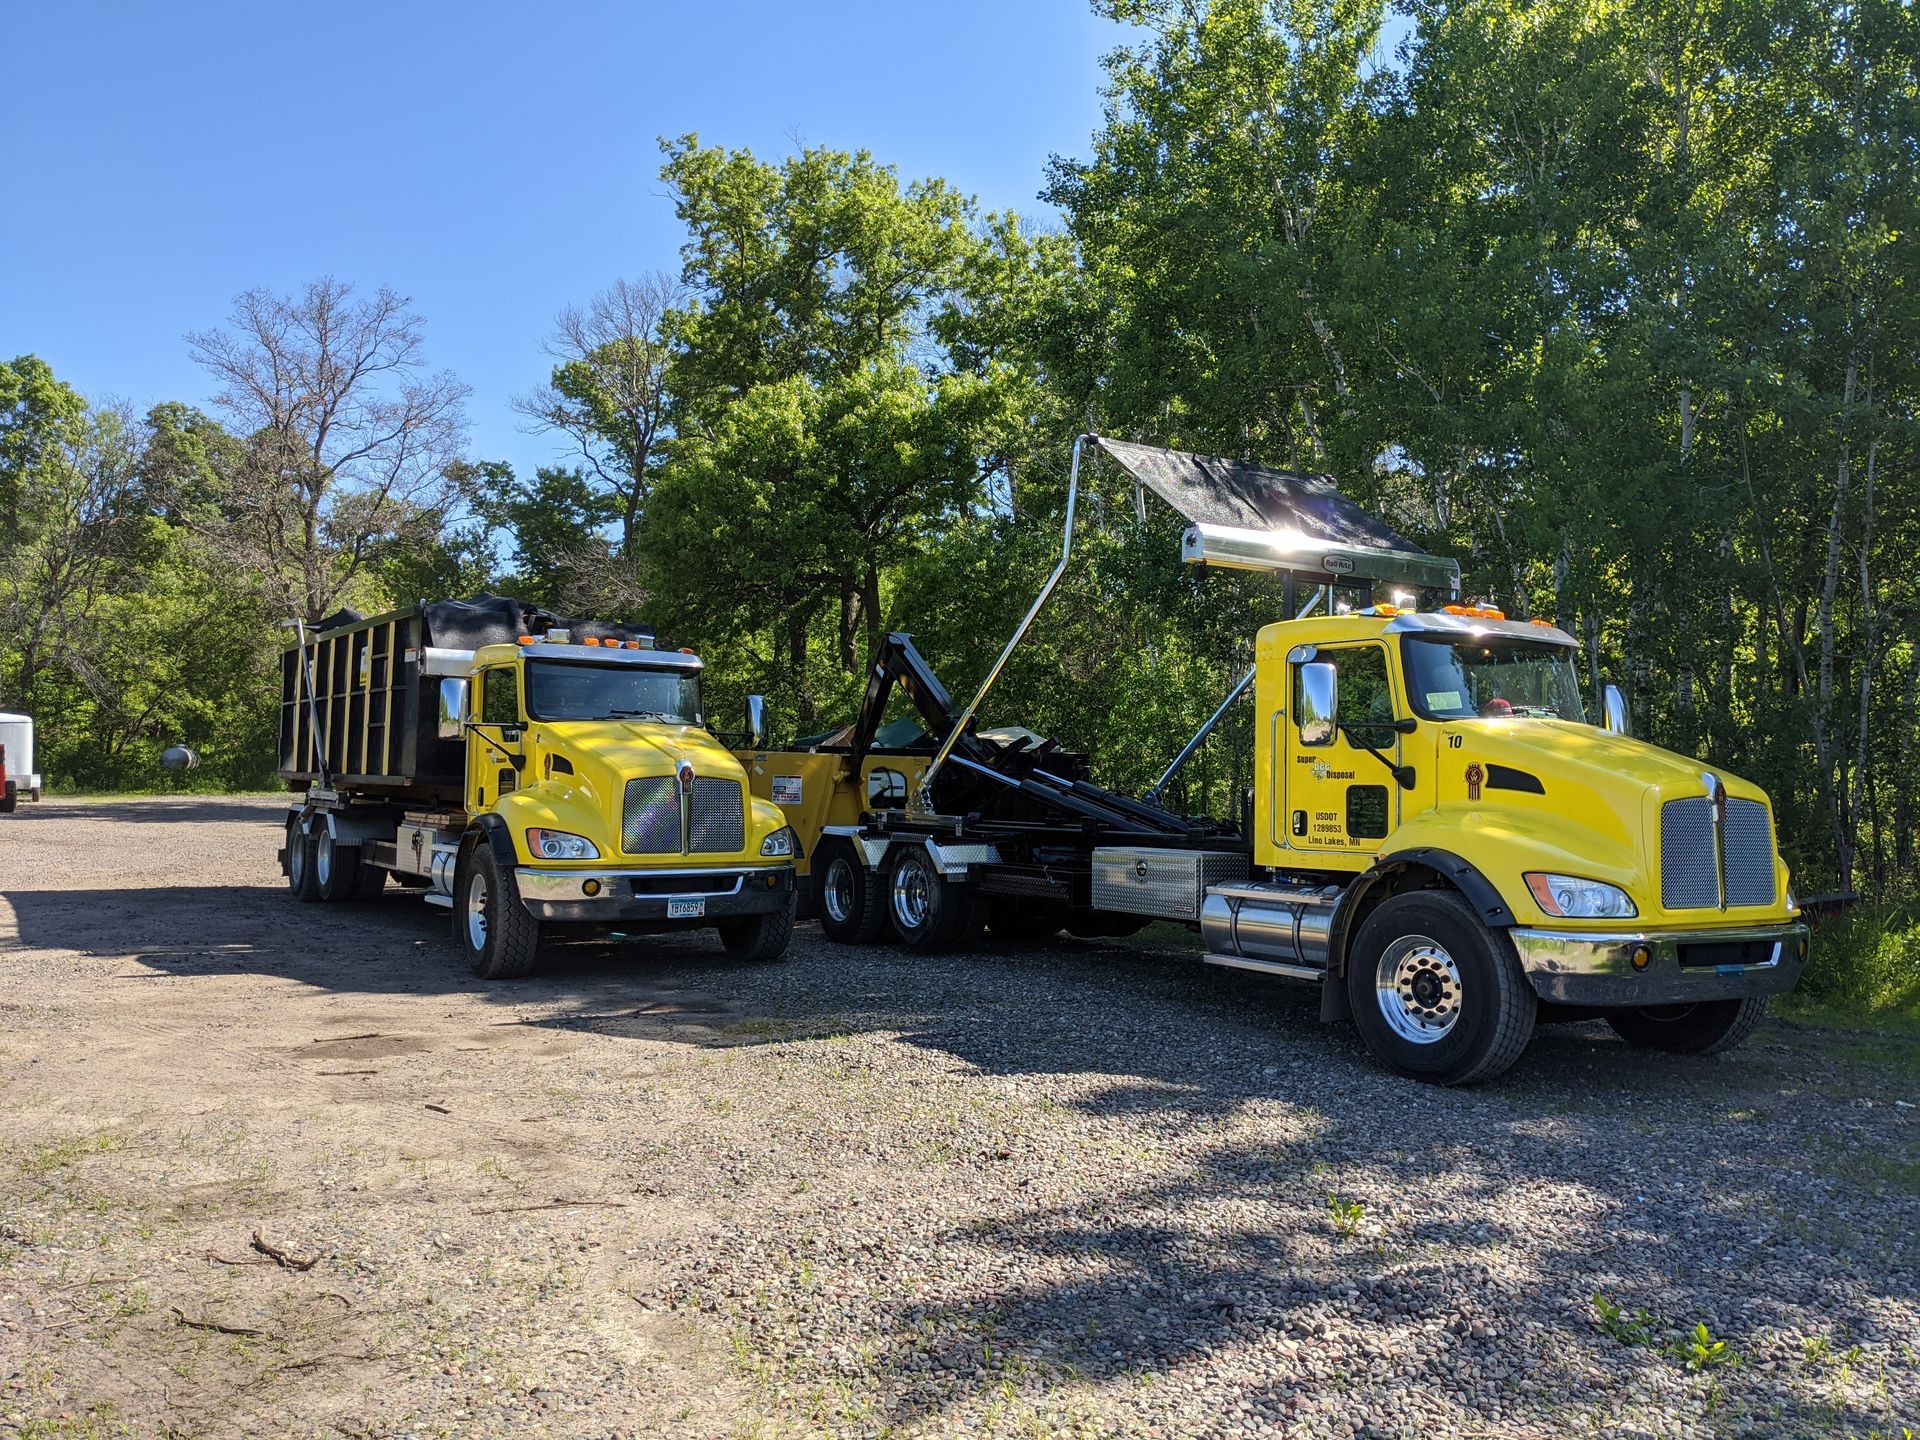 two yellow dump trucks are parked next to each other